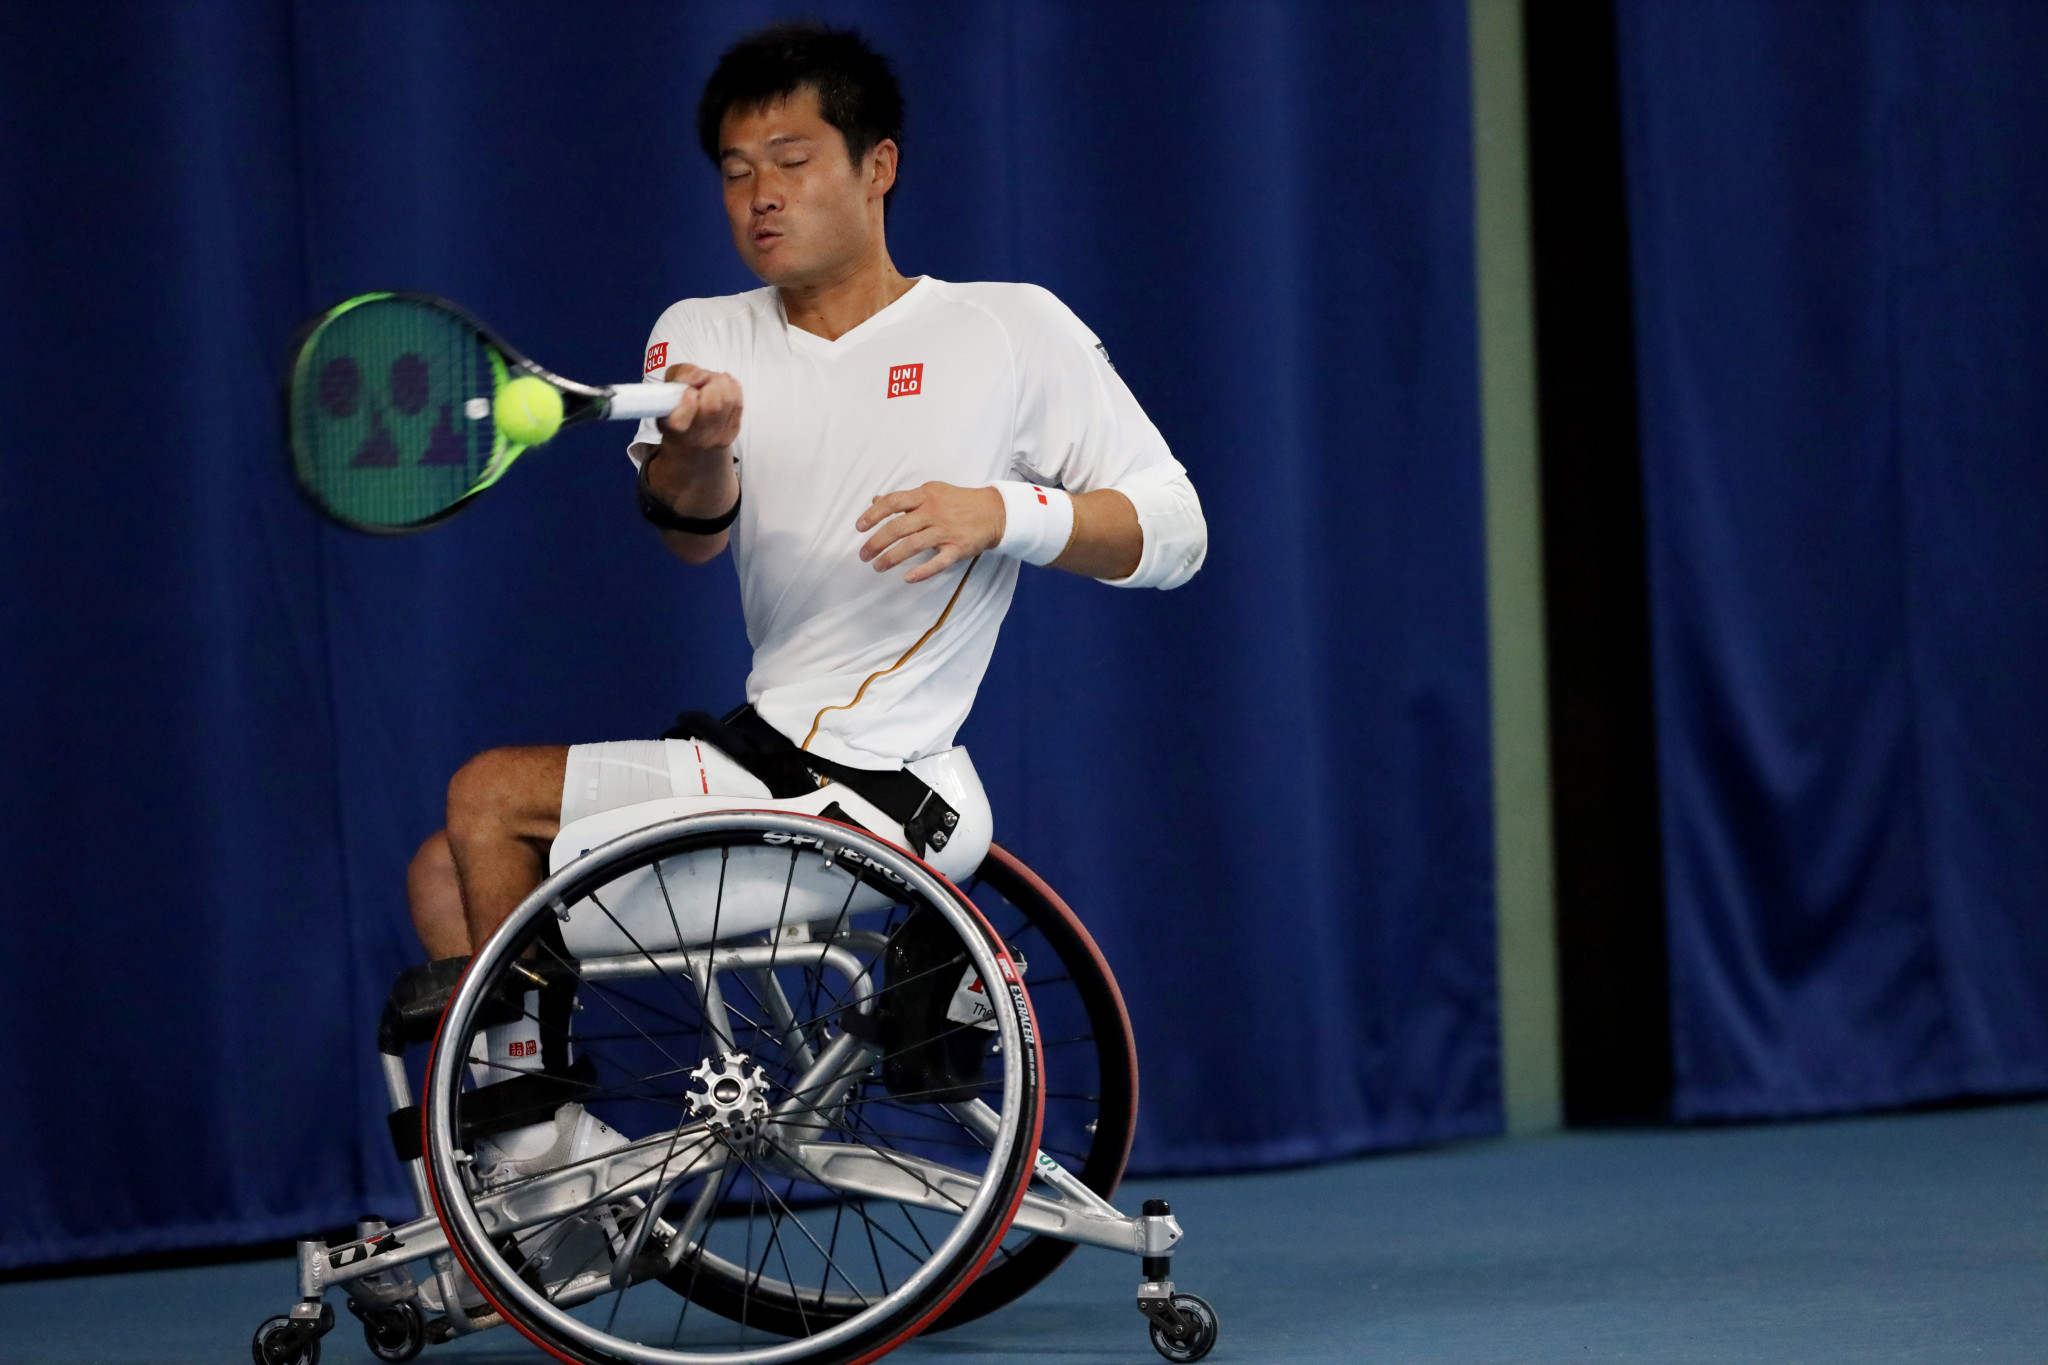 The International Tennis Federation's wheelchair tennis development plan targets an increase in the number of people and countries involved in the sport ©Getty Images